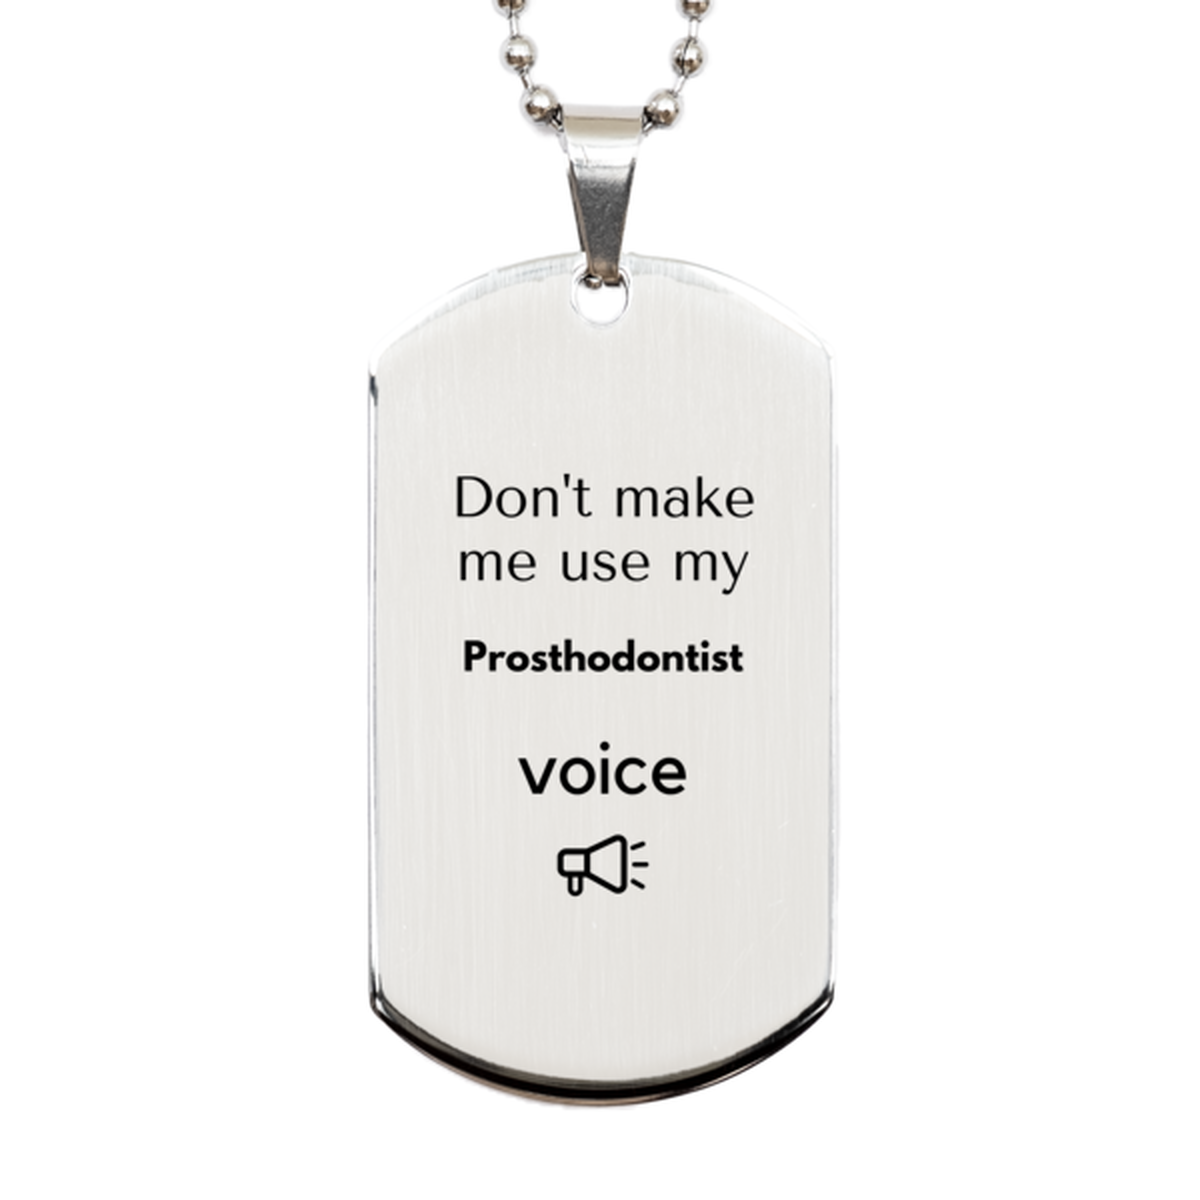 Don't make me use my Prosthodontist voice, Sarcasm Prosthodontist Gifts, Christmas Prosthodontist Silver Dog Tag Birthday Unique Gifts For Prosthodontist Coworkers, Men, Women, Colleague, Friends